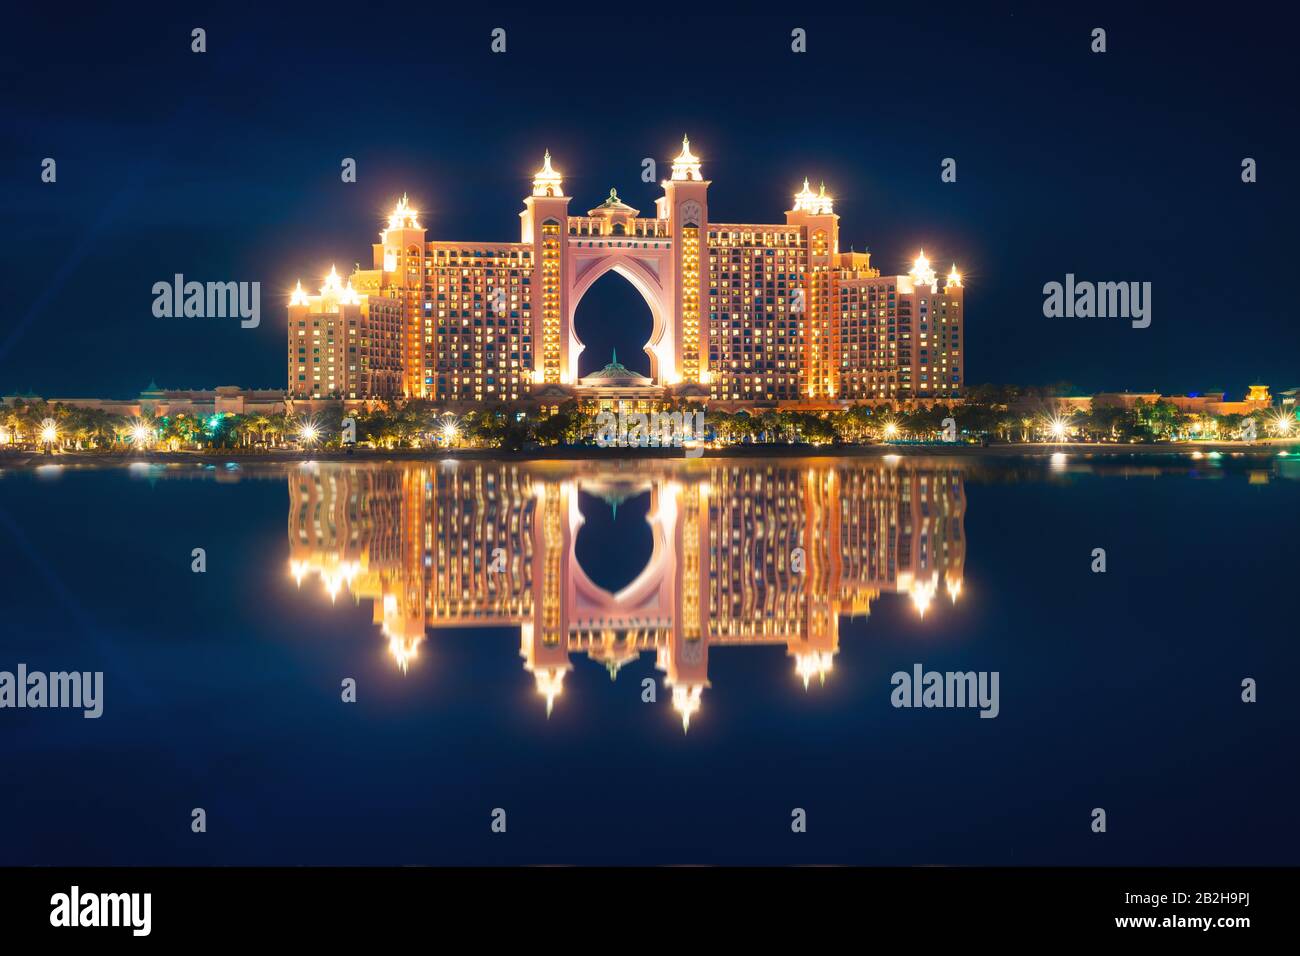 WOW view of Atlantis Resort, Hotel & Theme Park at the Palm Jumeirah Island, A view from The Pointe Dubai, UAE. Luxury travel inspiration. Stock Photo